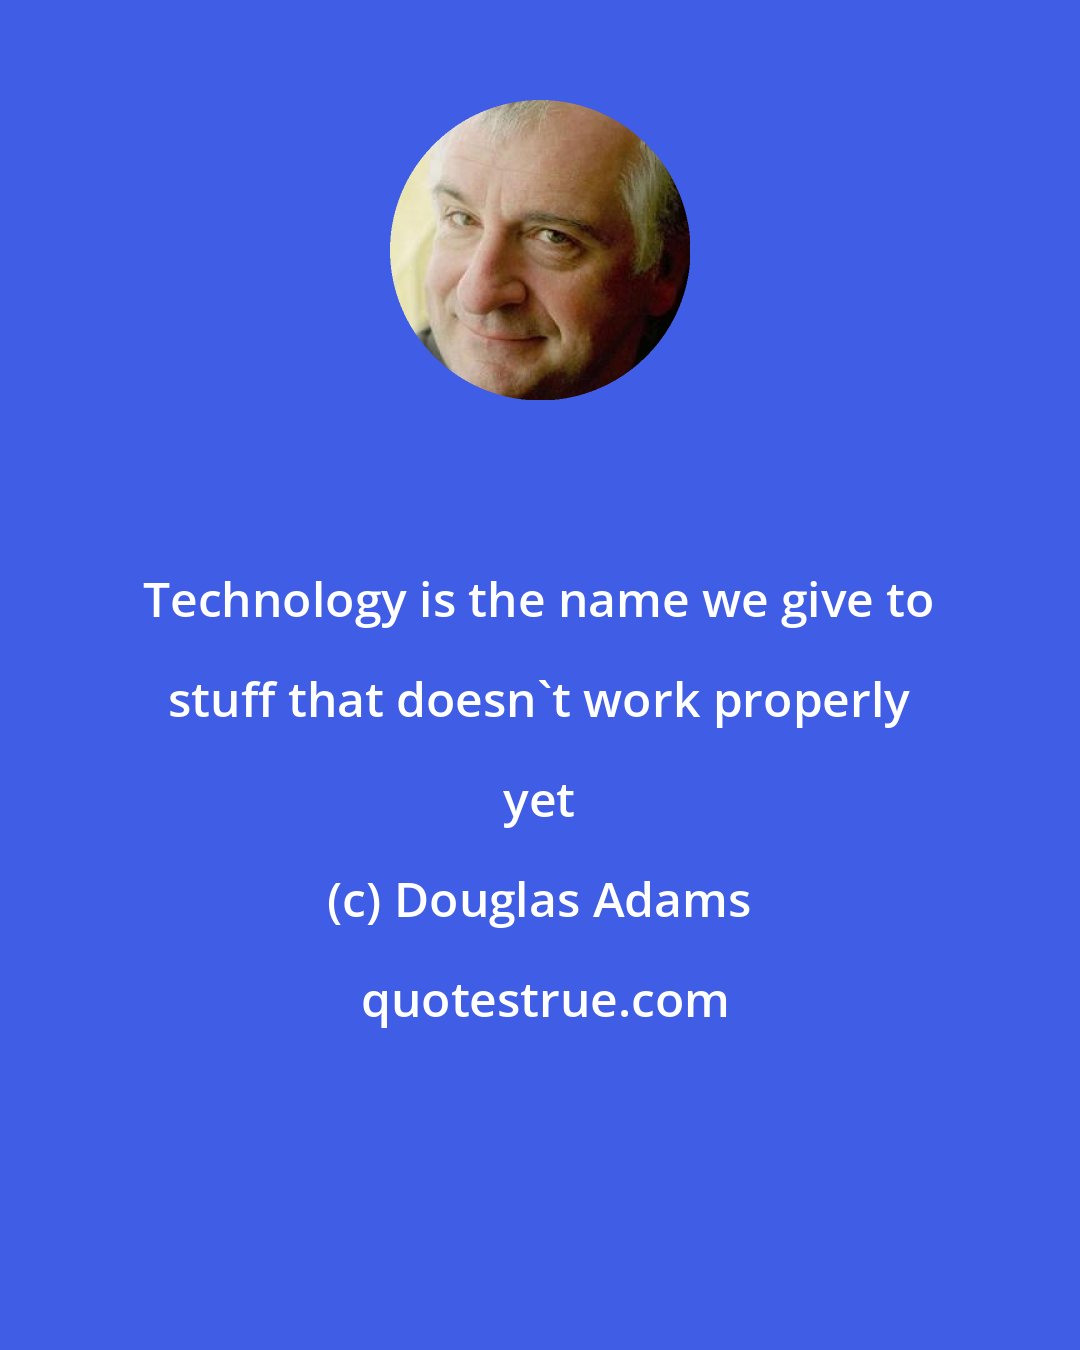 Douglas Adams: Technology is the name we give to stuff that doesn't work properly yet